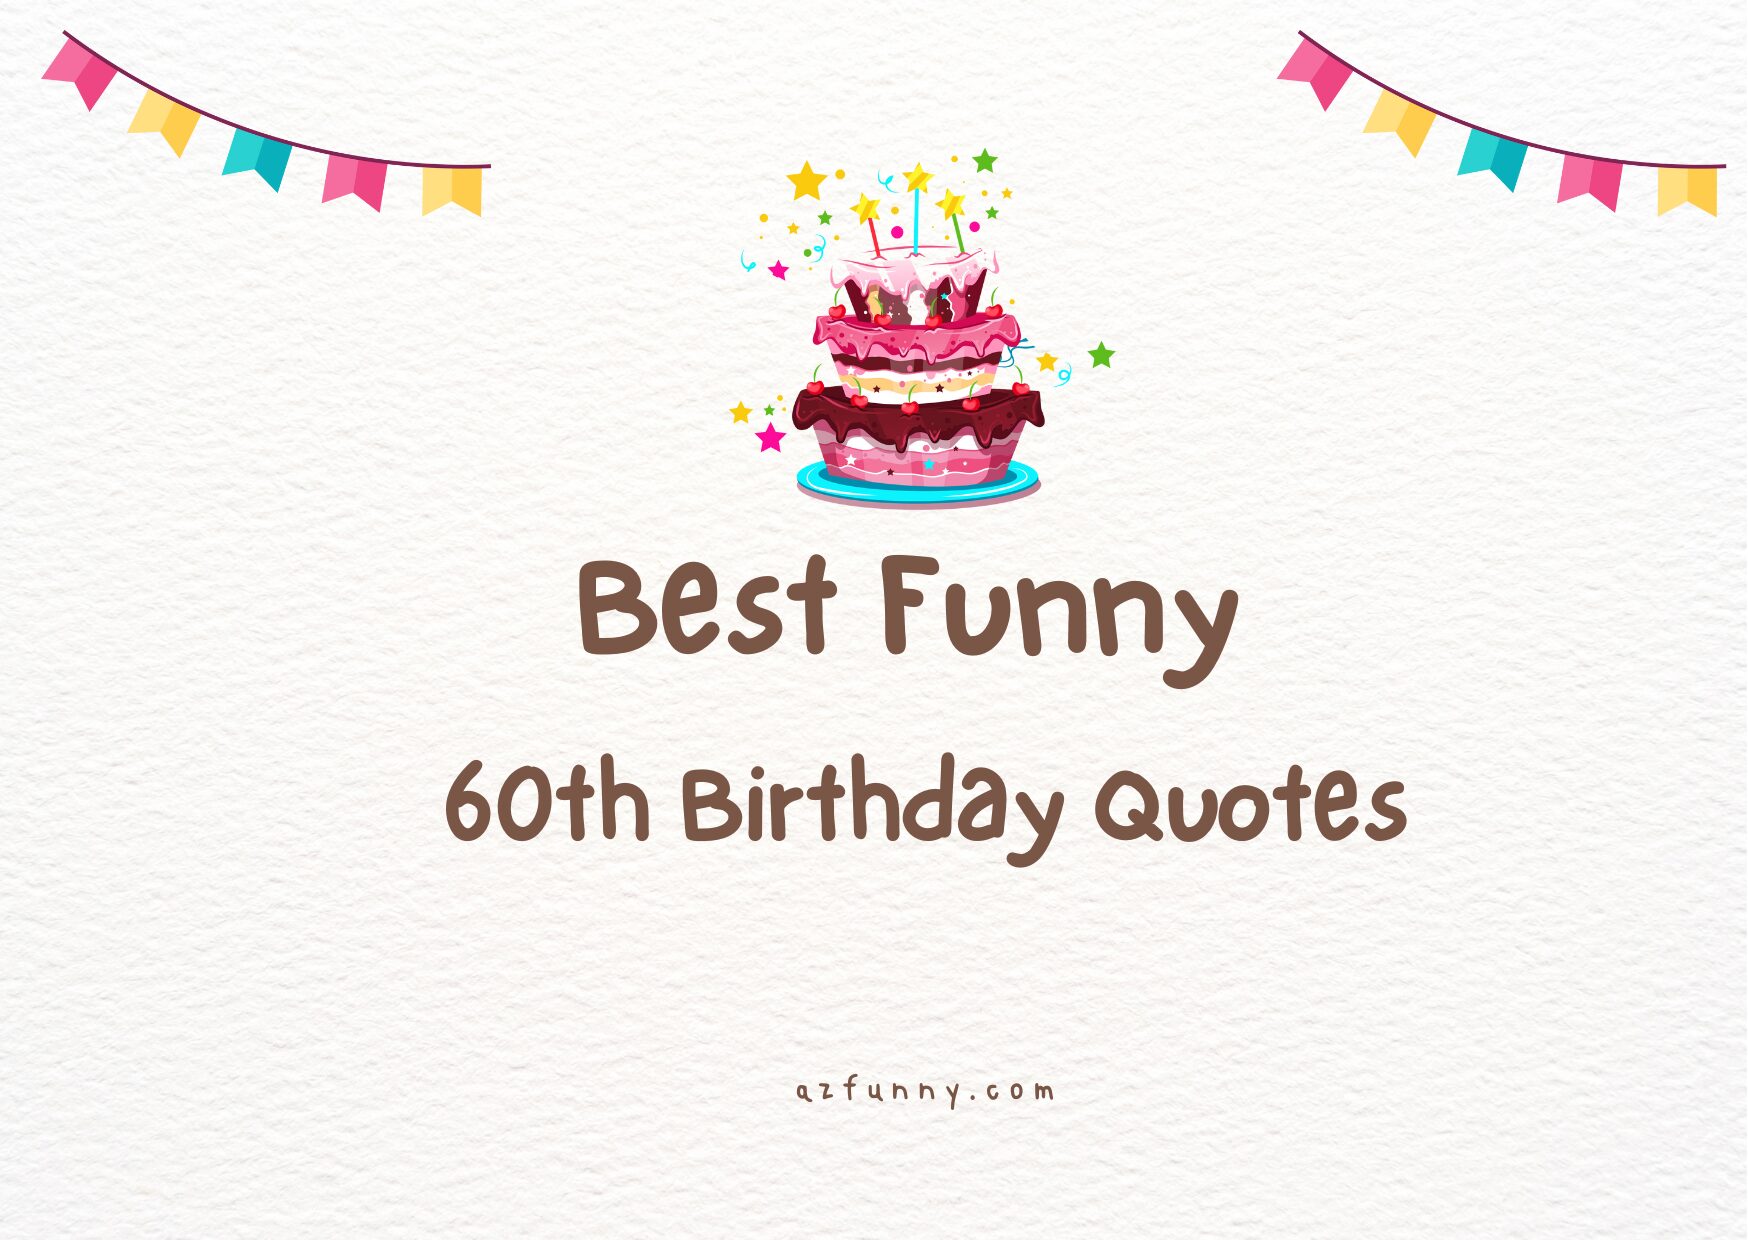 50+ Best Funny 60th Birthday Quotes To Make You Laugh